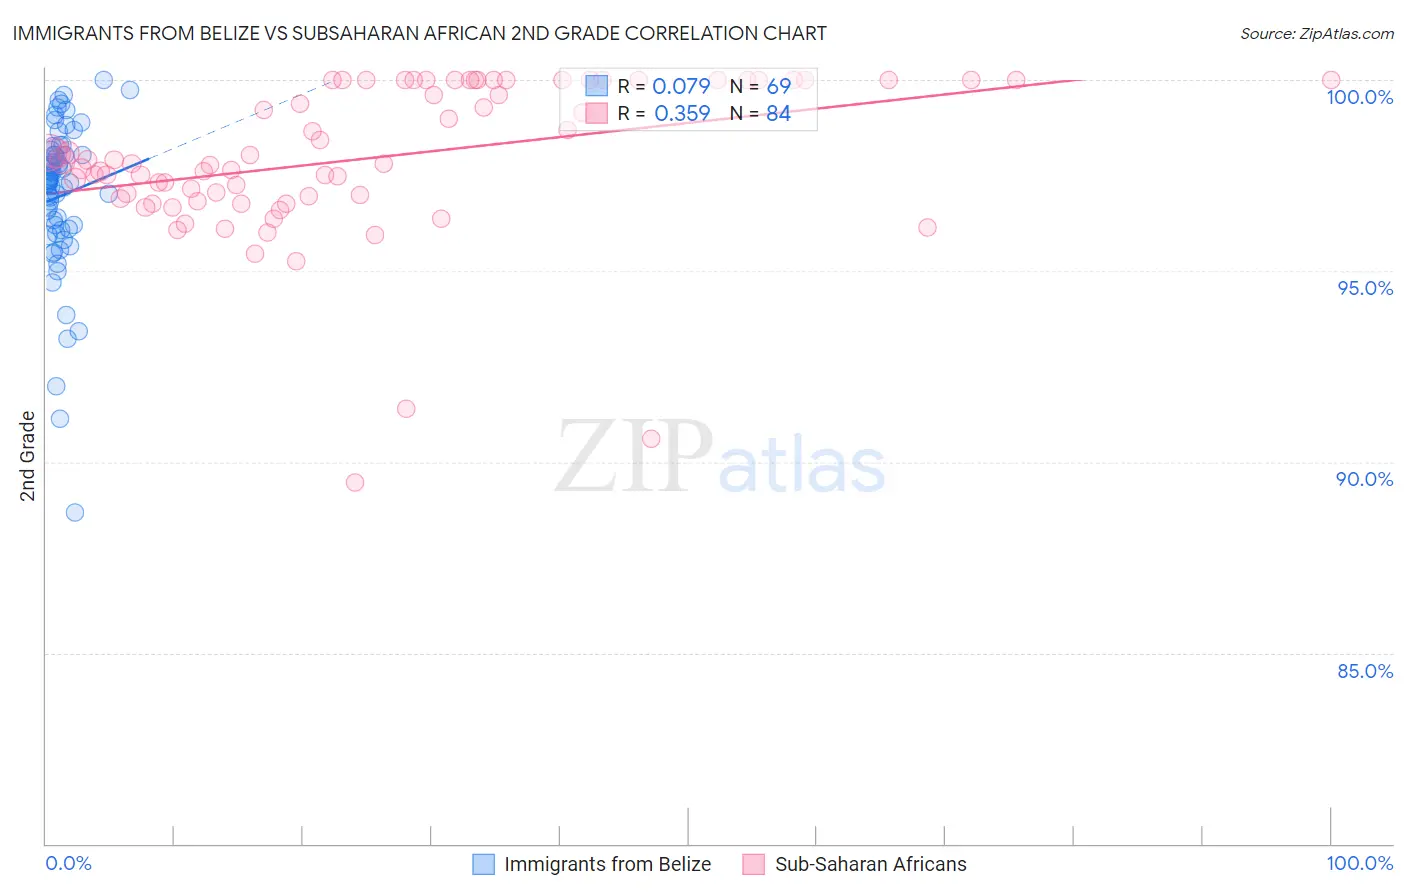 Immigrants from Belize vs Subsaharan African 2nd Grade